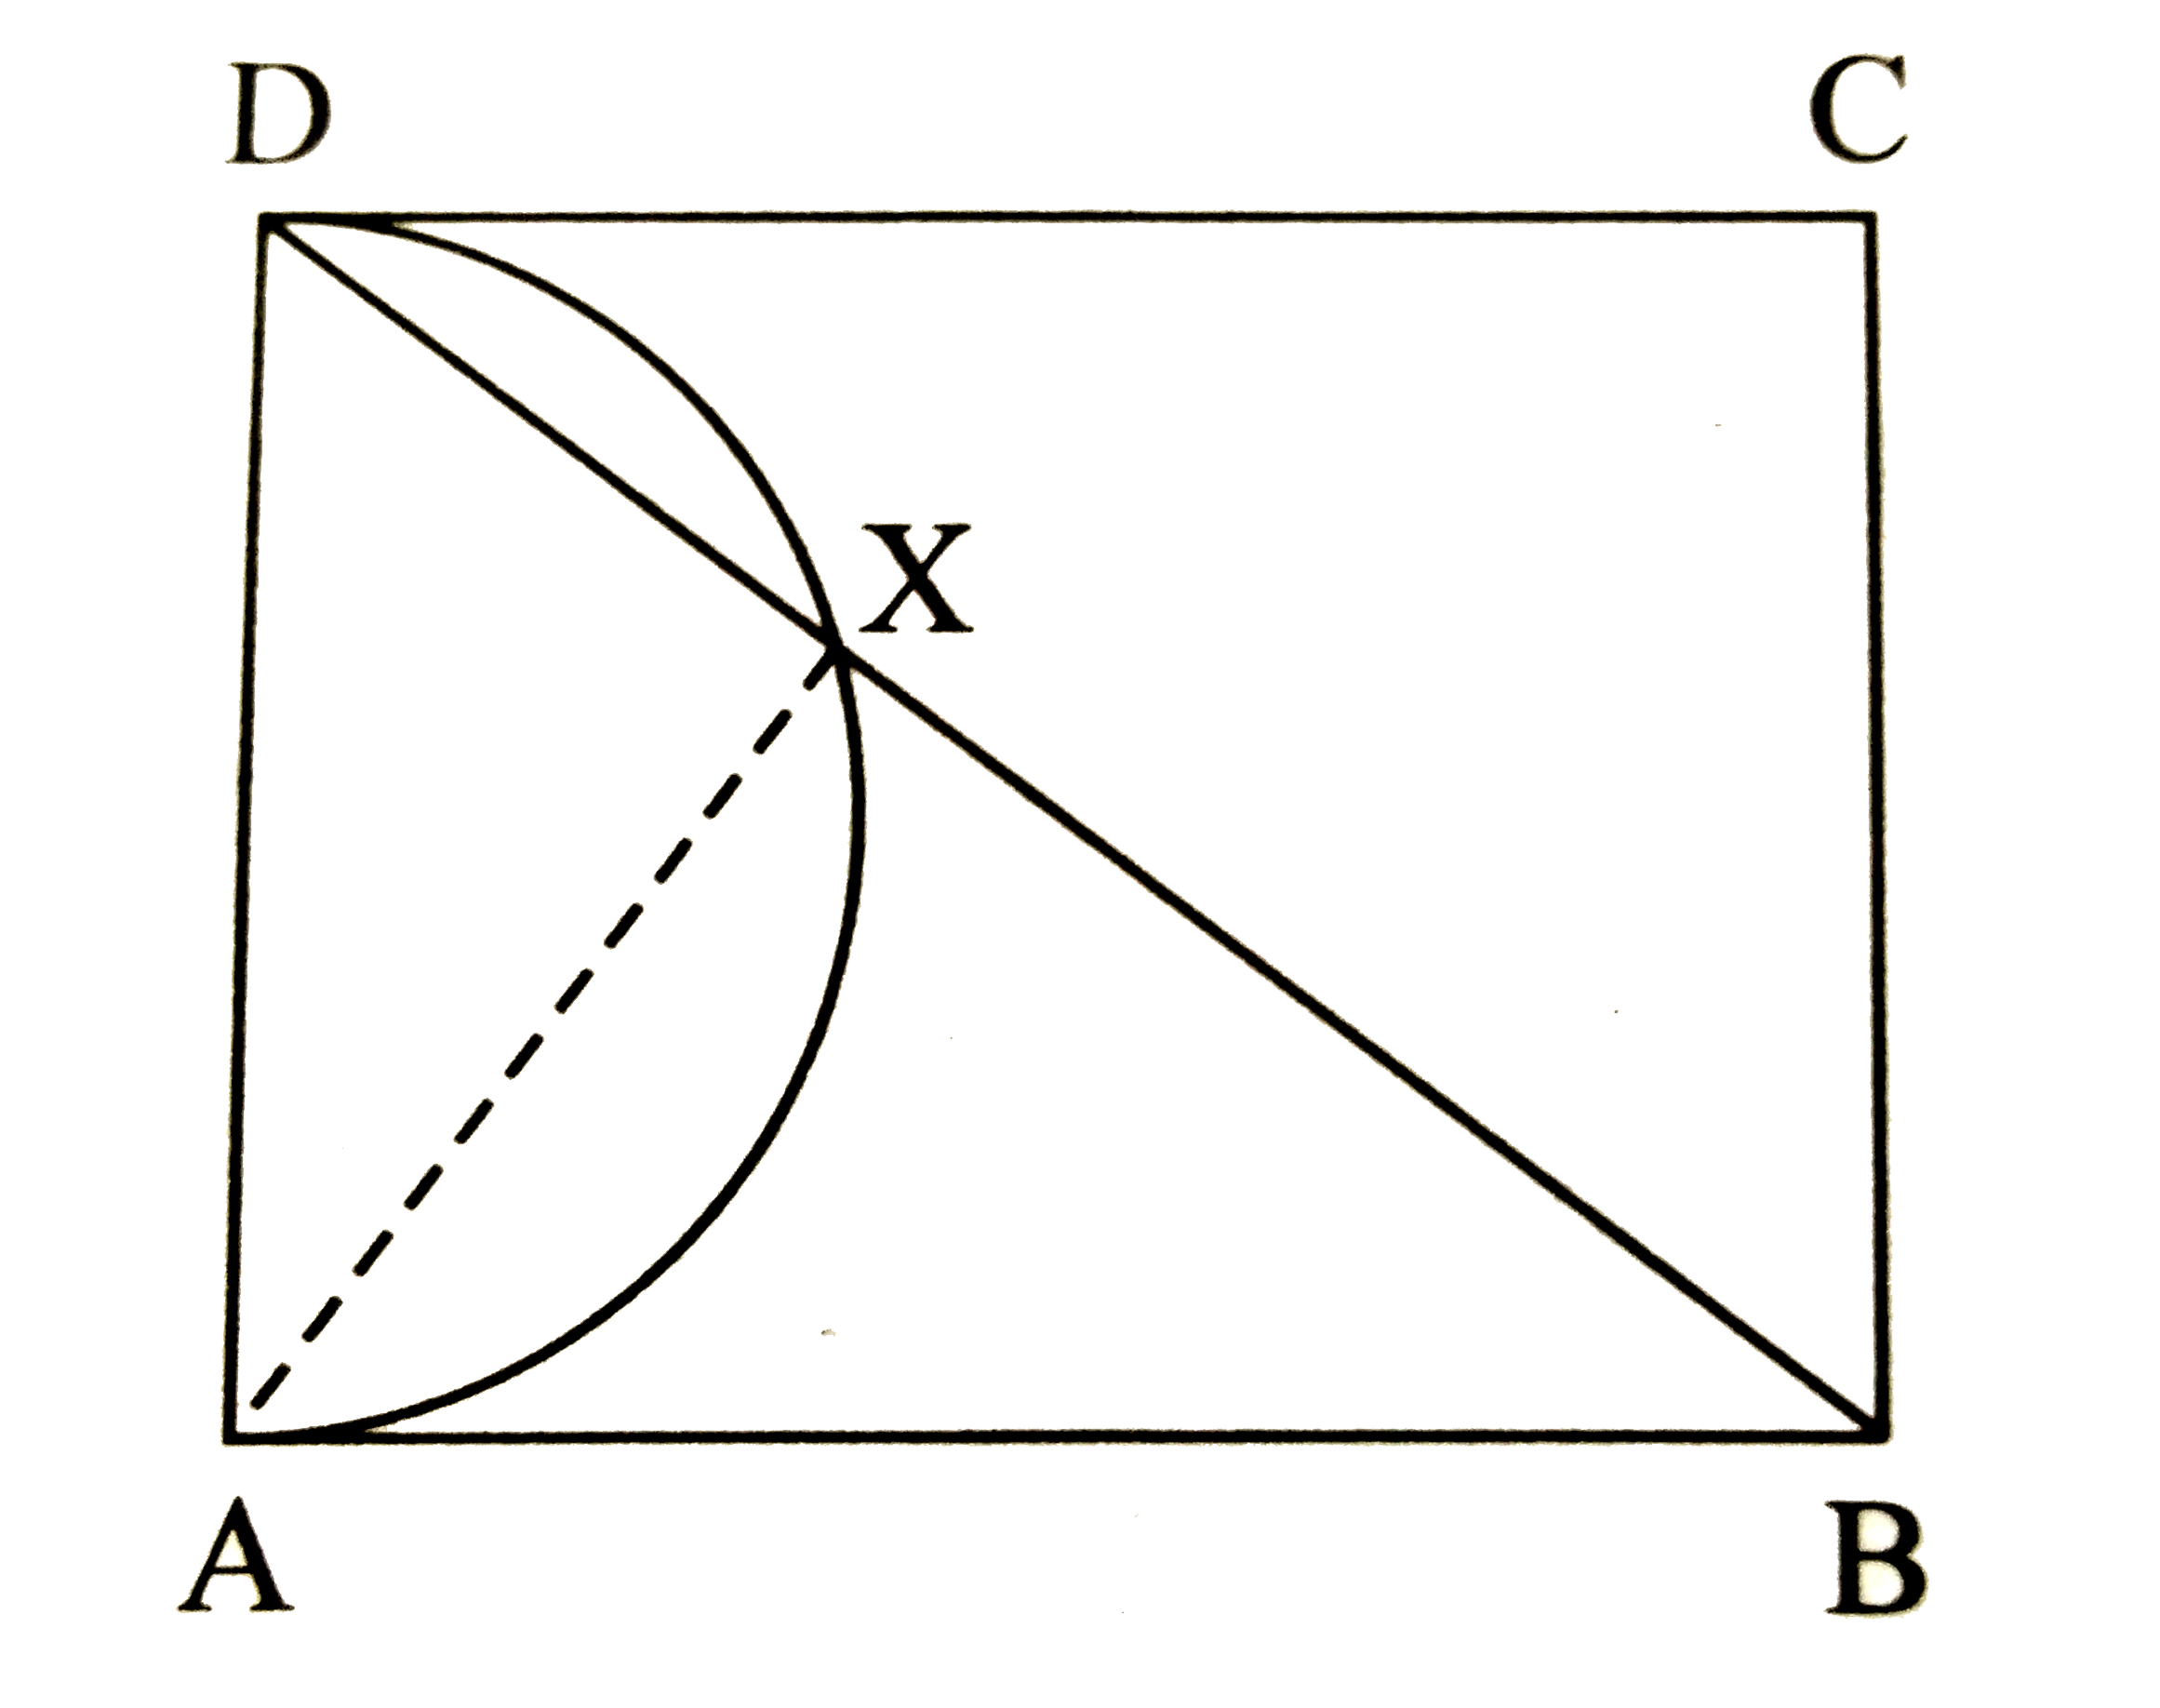 square ABCD is a rectangle. Taking AD as a diameter a semicircle AXD is drawn which intersets diagonal BD at X. If AB = 12 cm , AD == 9 cm , find the values of (i) BD (ii) BX.